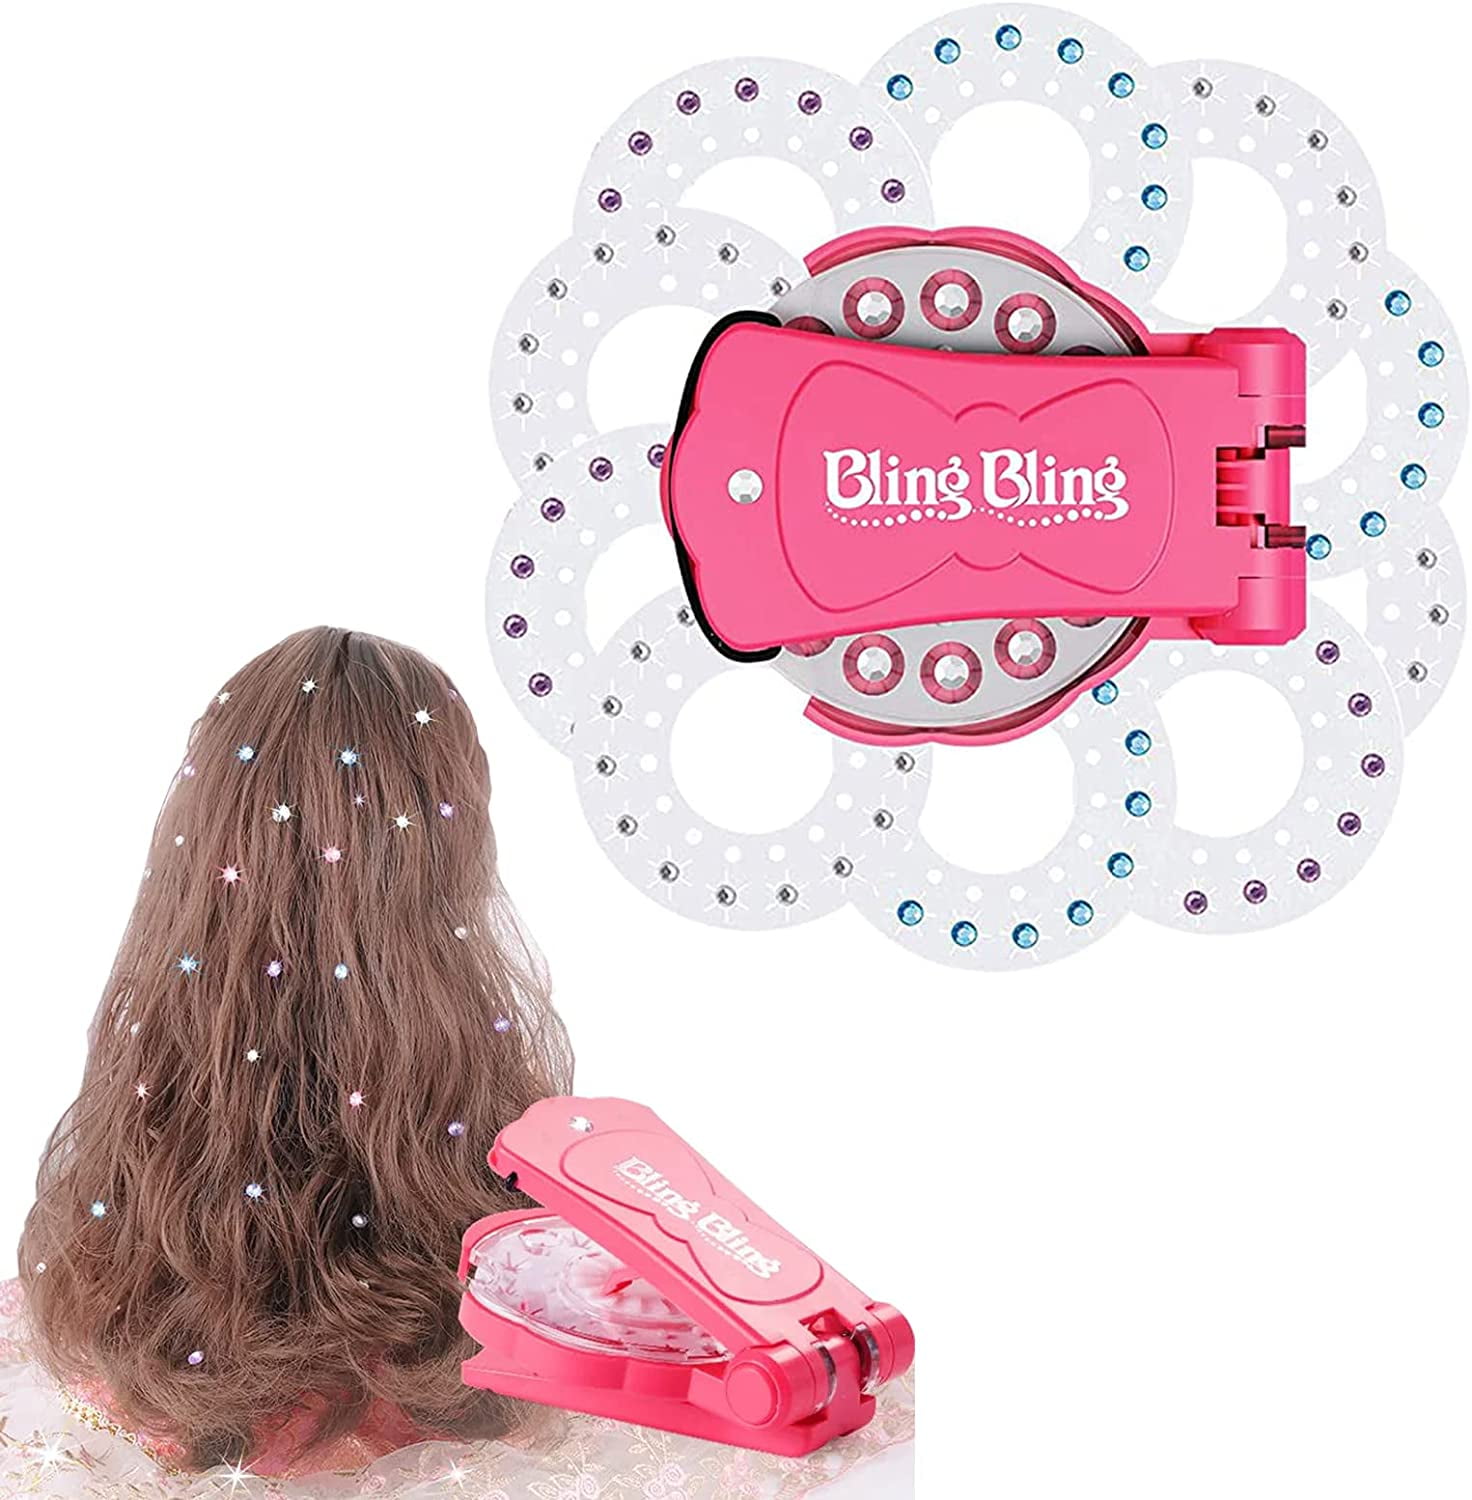 Hair Gem Stamper - Women And Girl Hair Bedazzle Styling Tool + 180 Hair  Gems - Bling Hair In Seconds Bedazzling Multi-Faceted Gems - Fashion  Decoratio